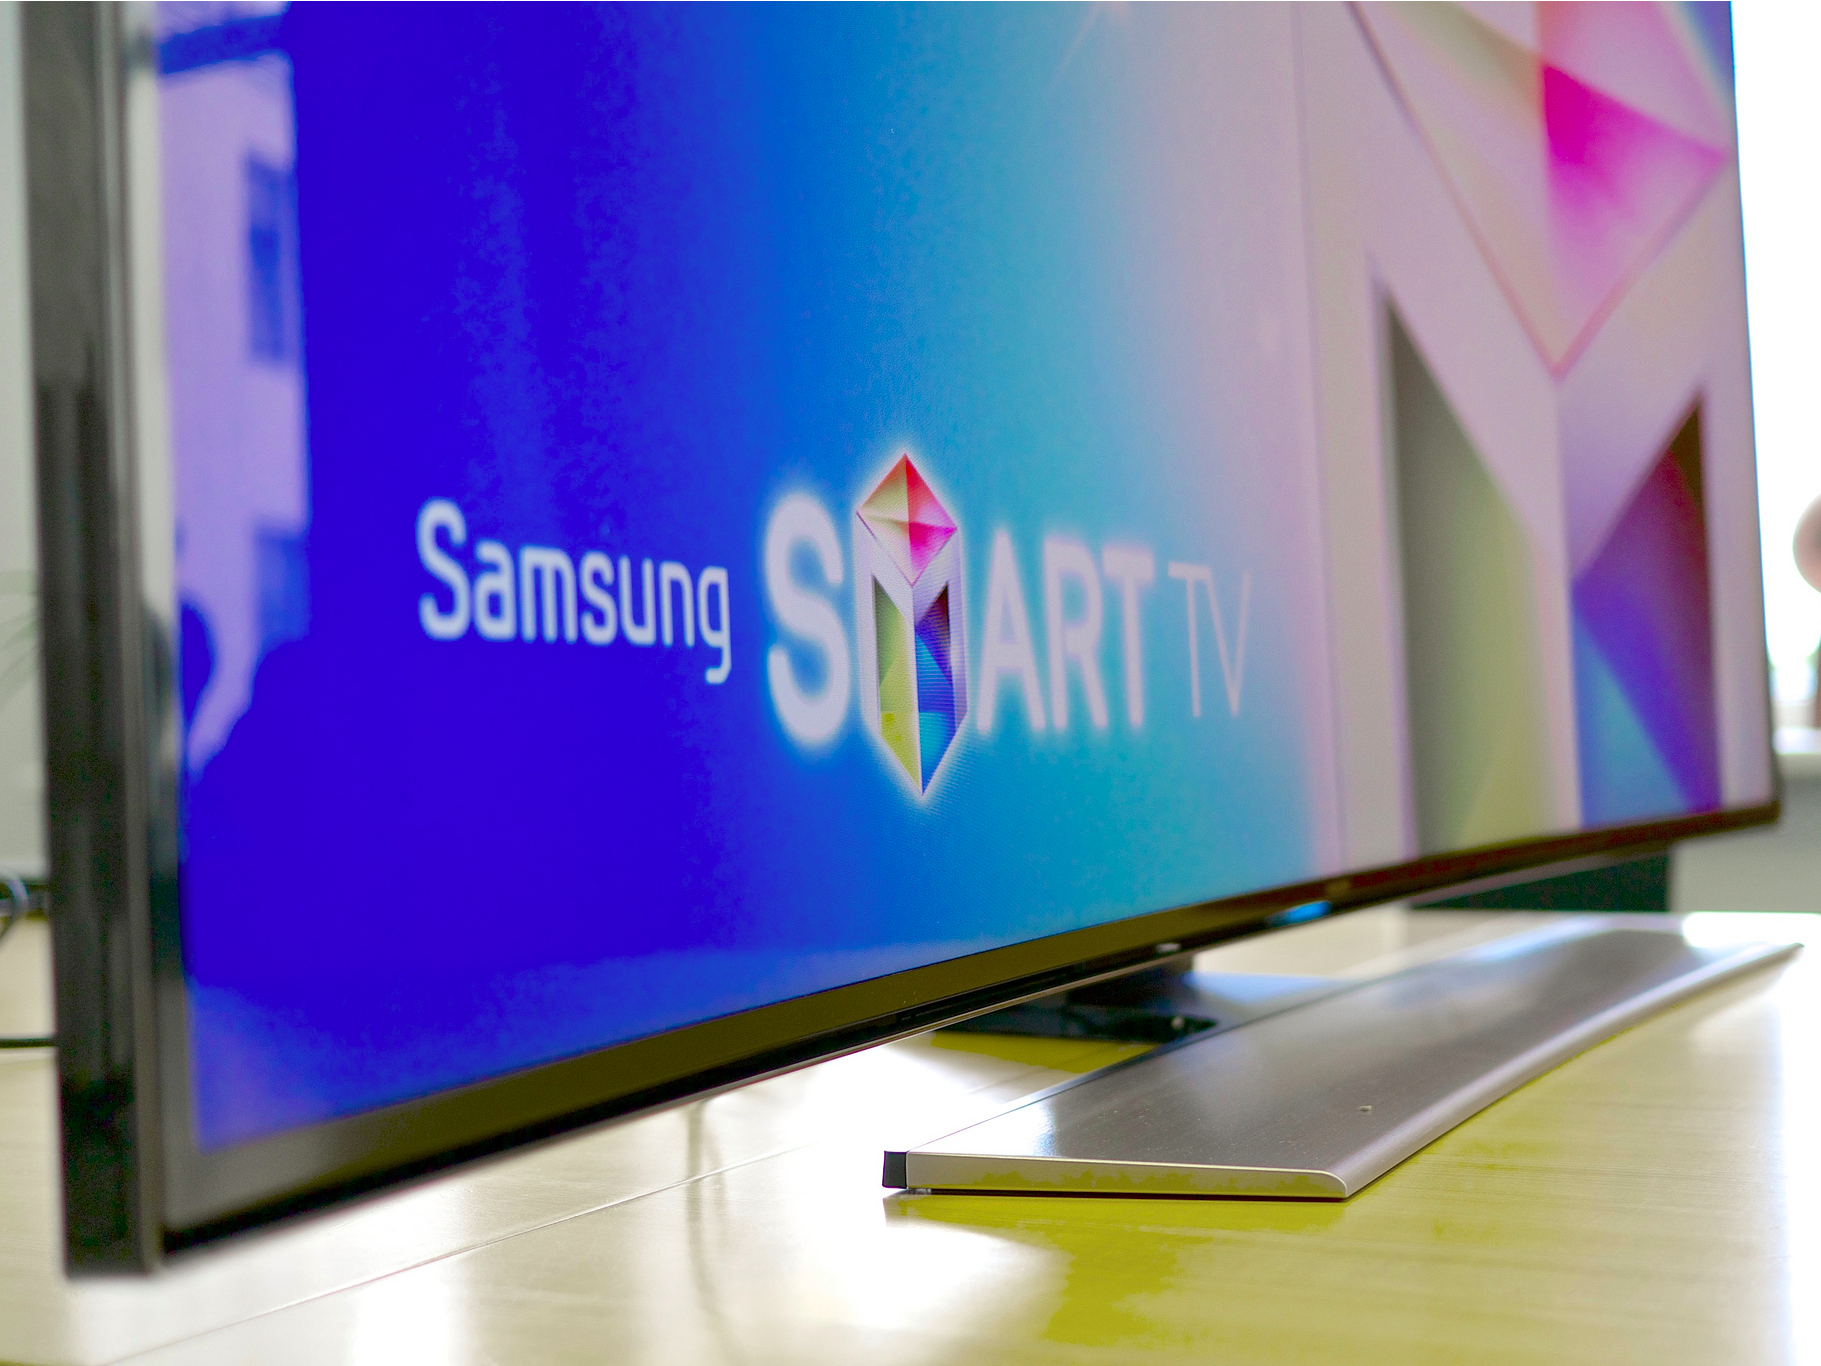 Adventist Church now witnessing to hackers through Samsung TVs